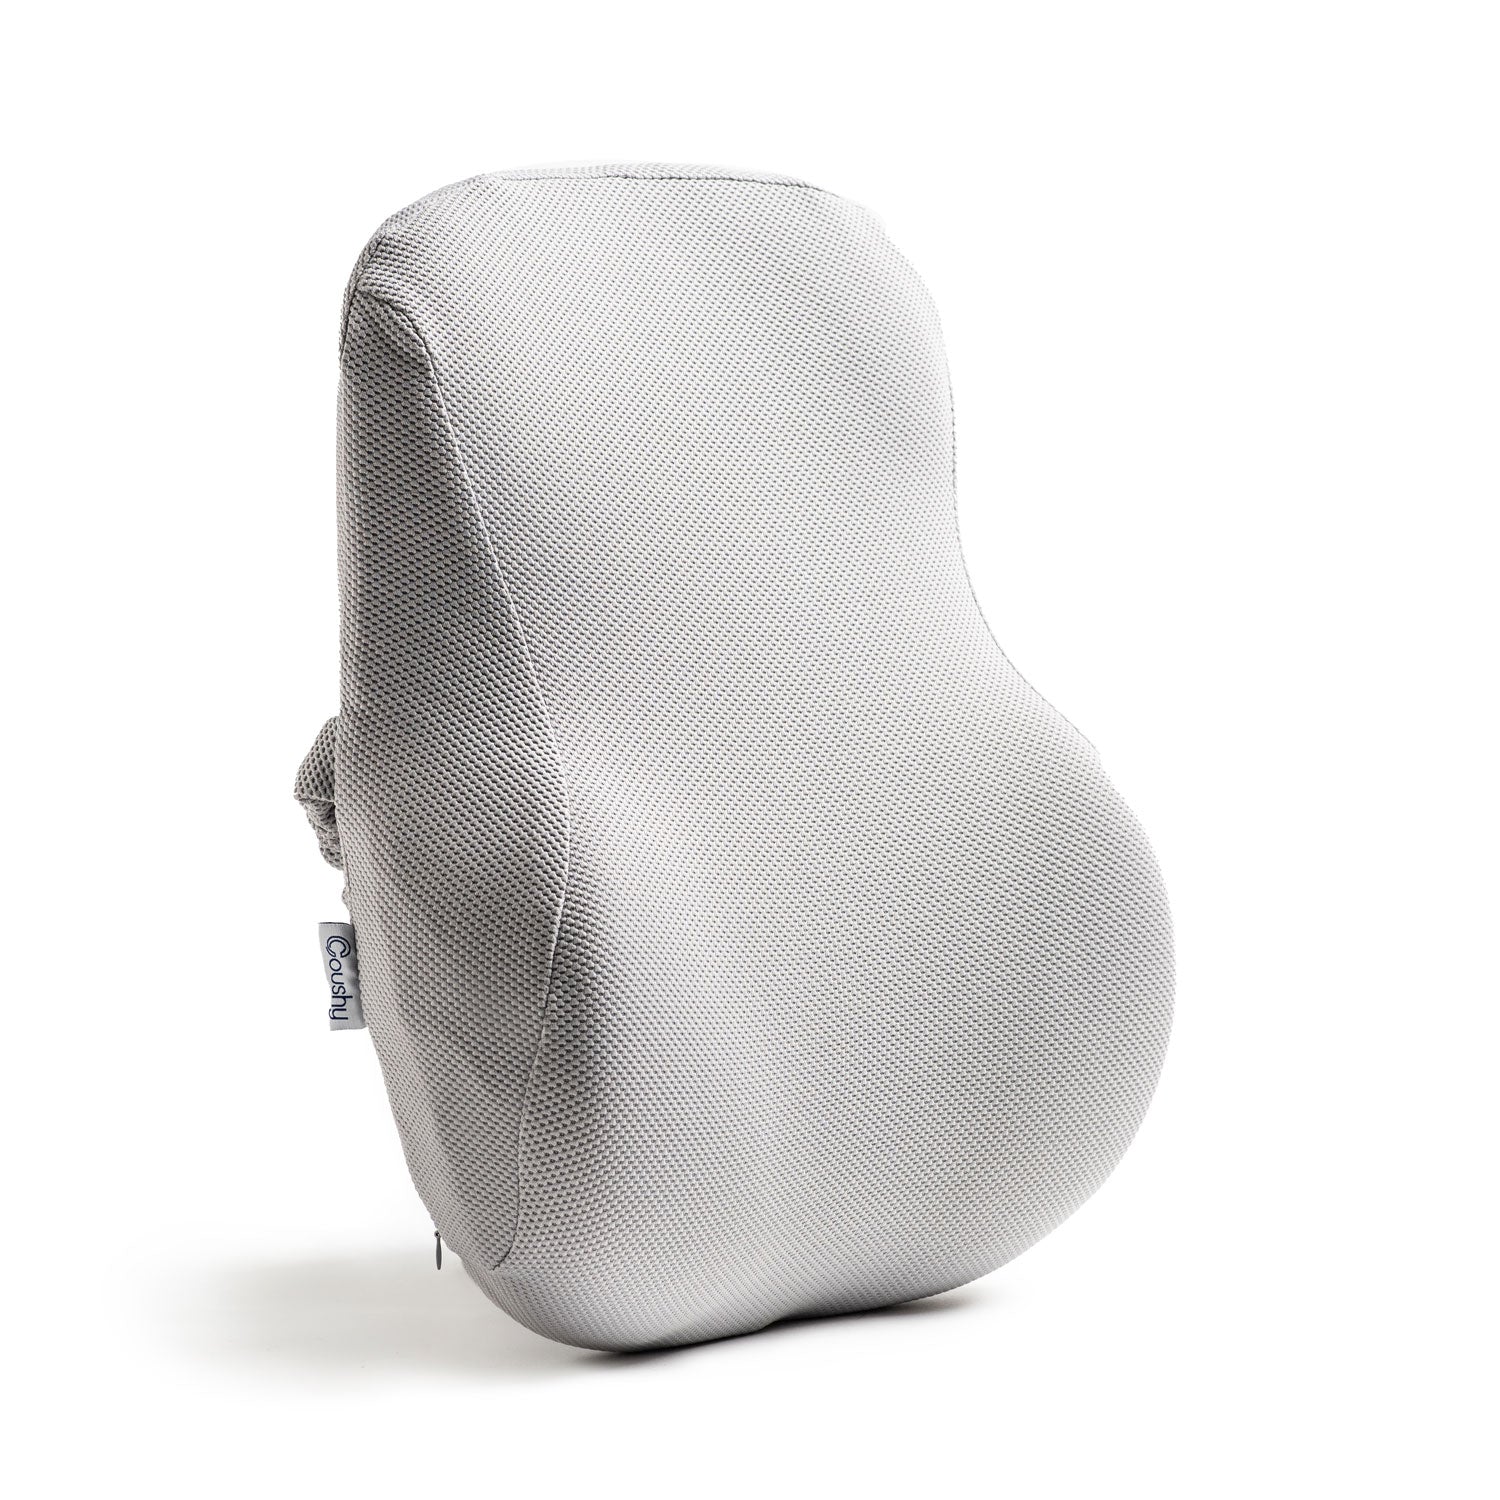 Cubii Cushii Lateral Lumbar Support Cushion - Relieve Back Pain - Improve